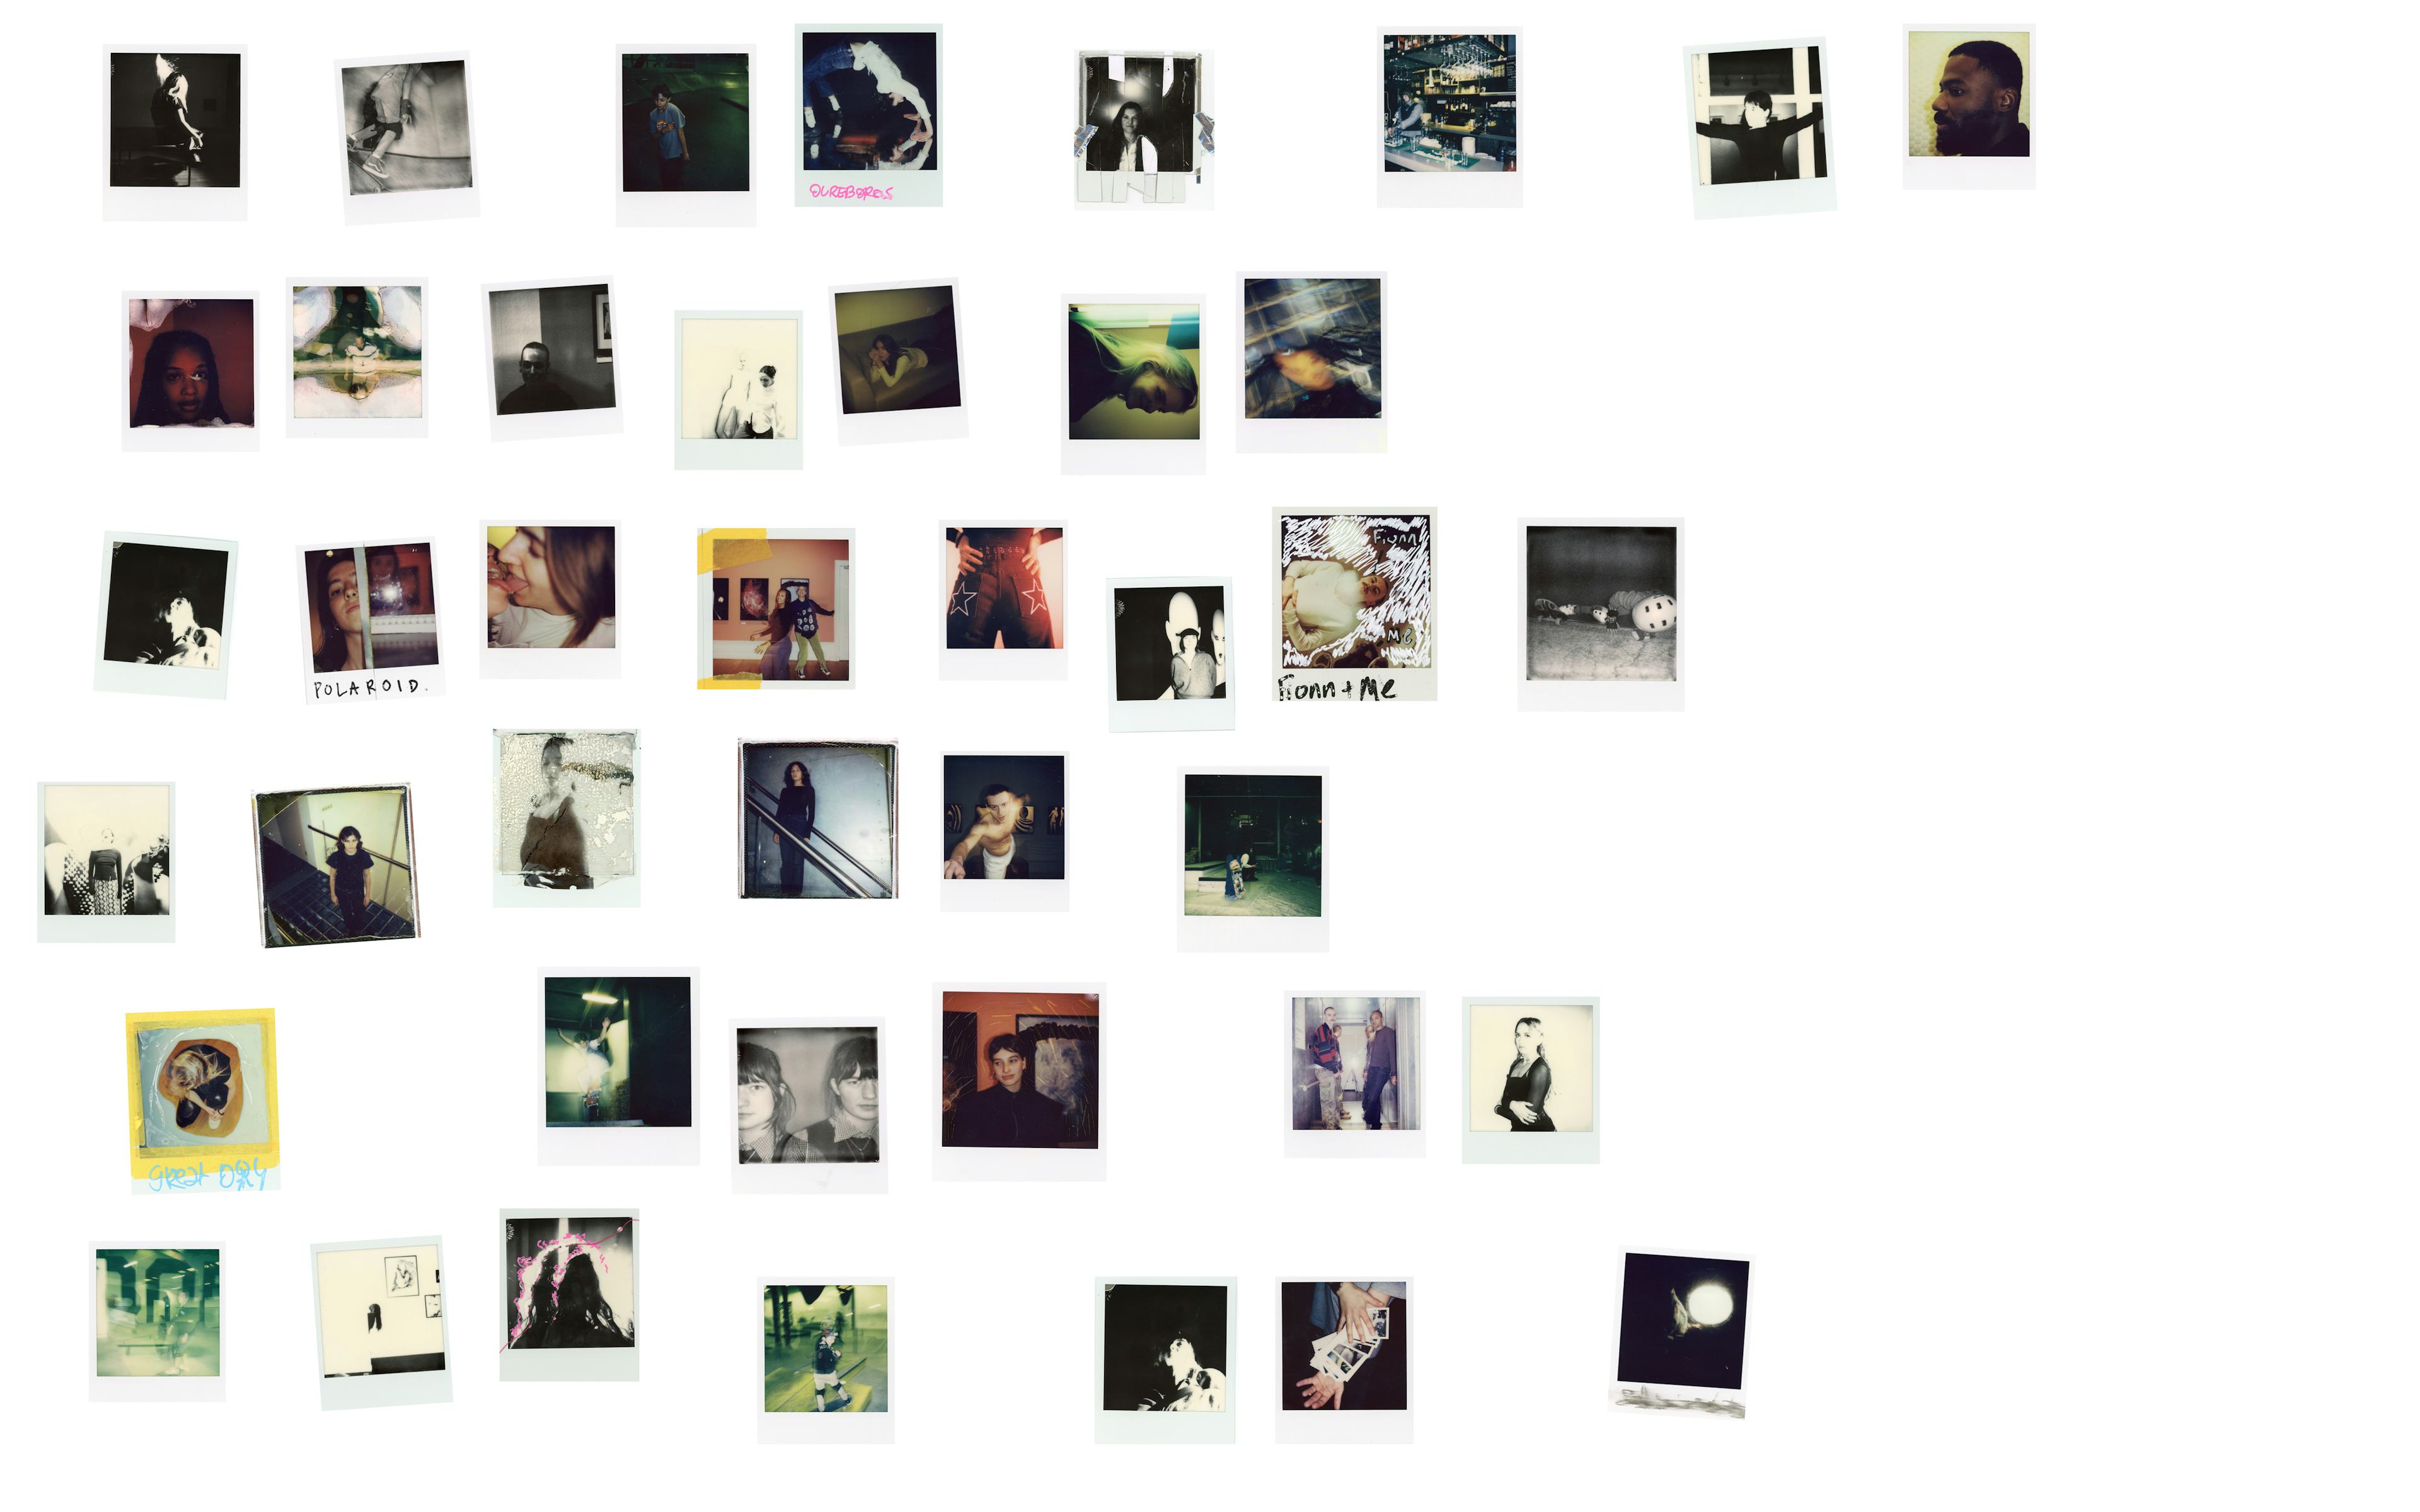 Lots of polaroids together making a big collage of images